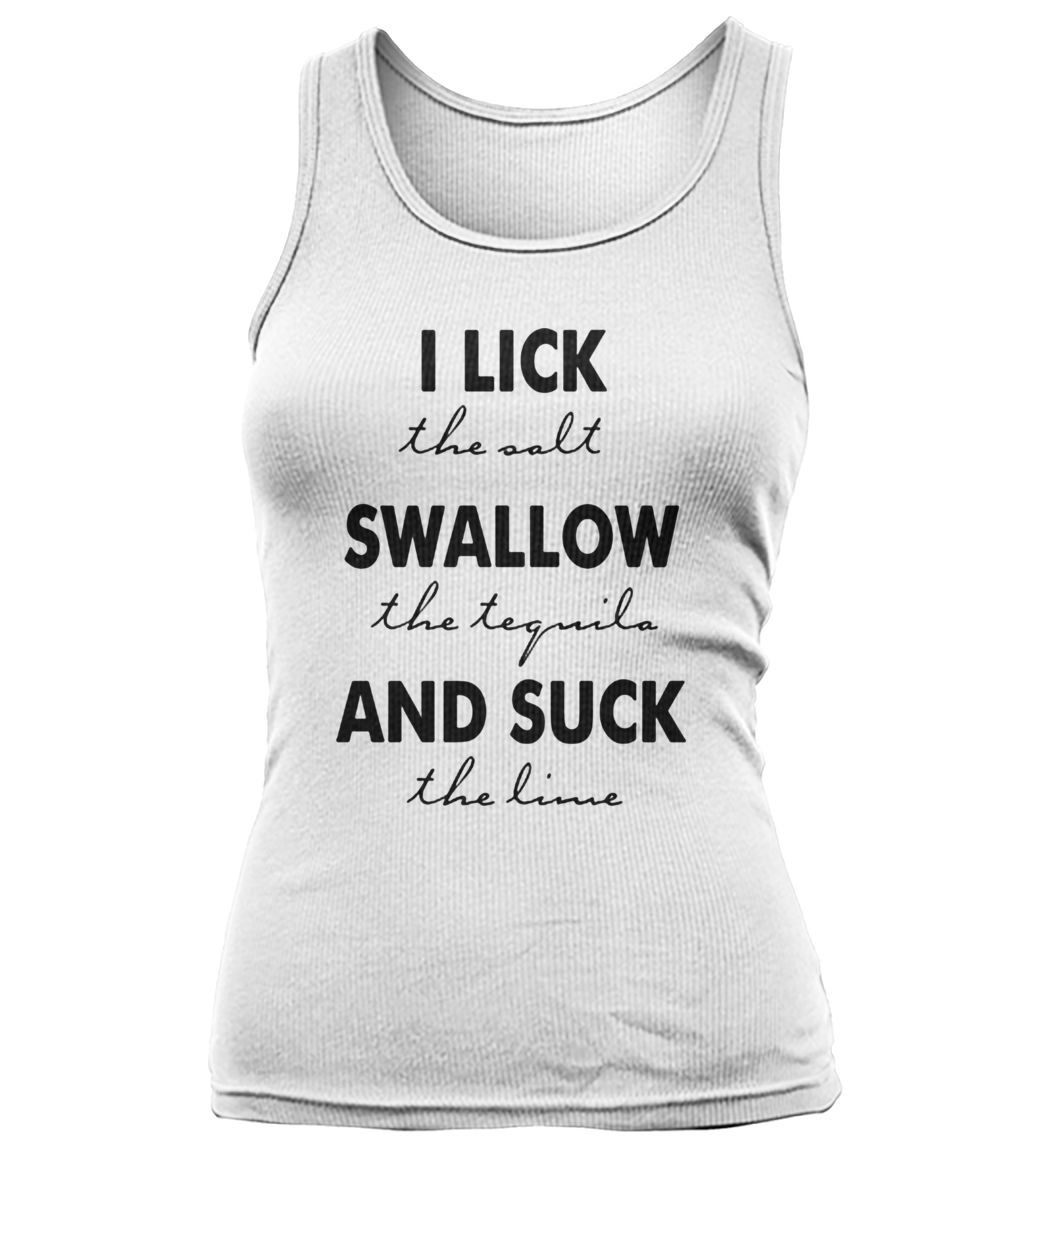 I lick the salt swallow the tequila and suck the lime women's tank top